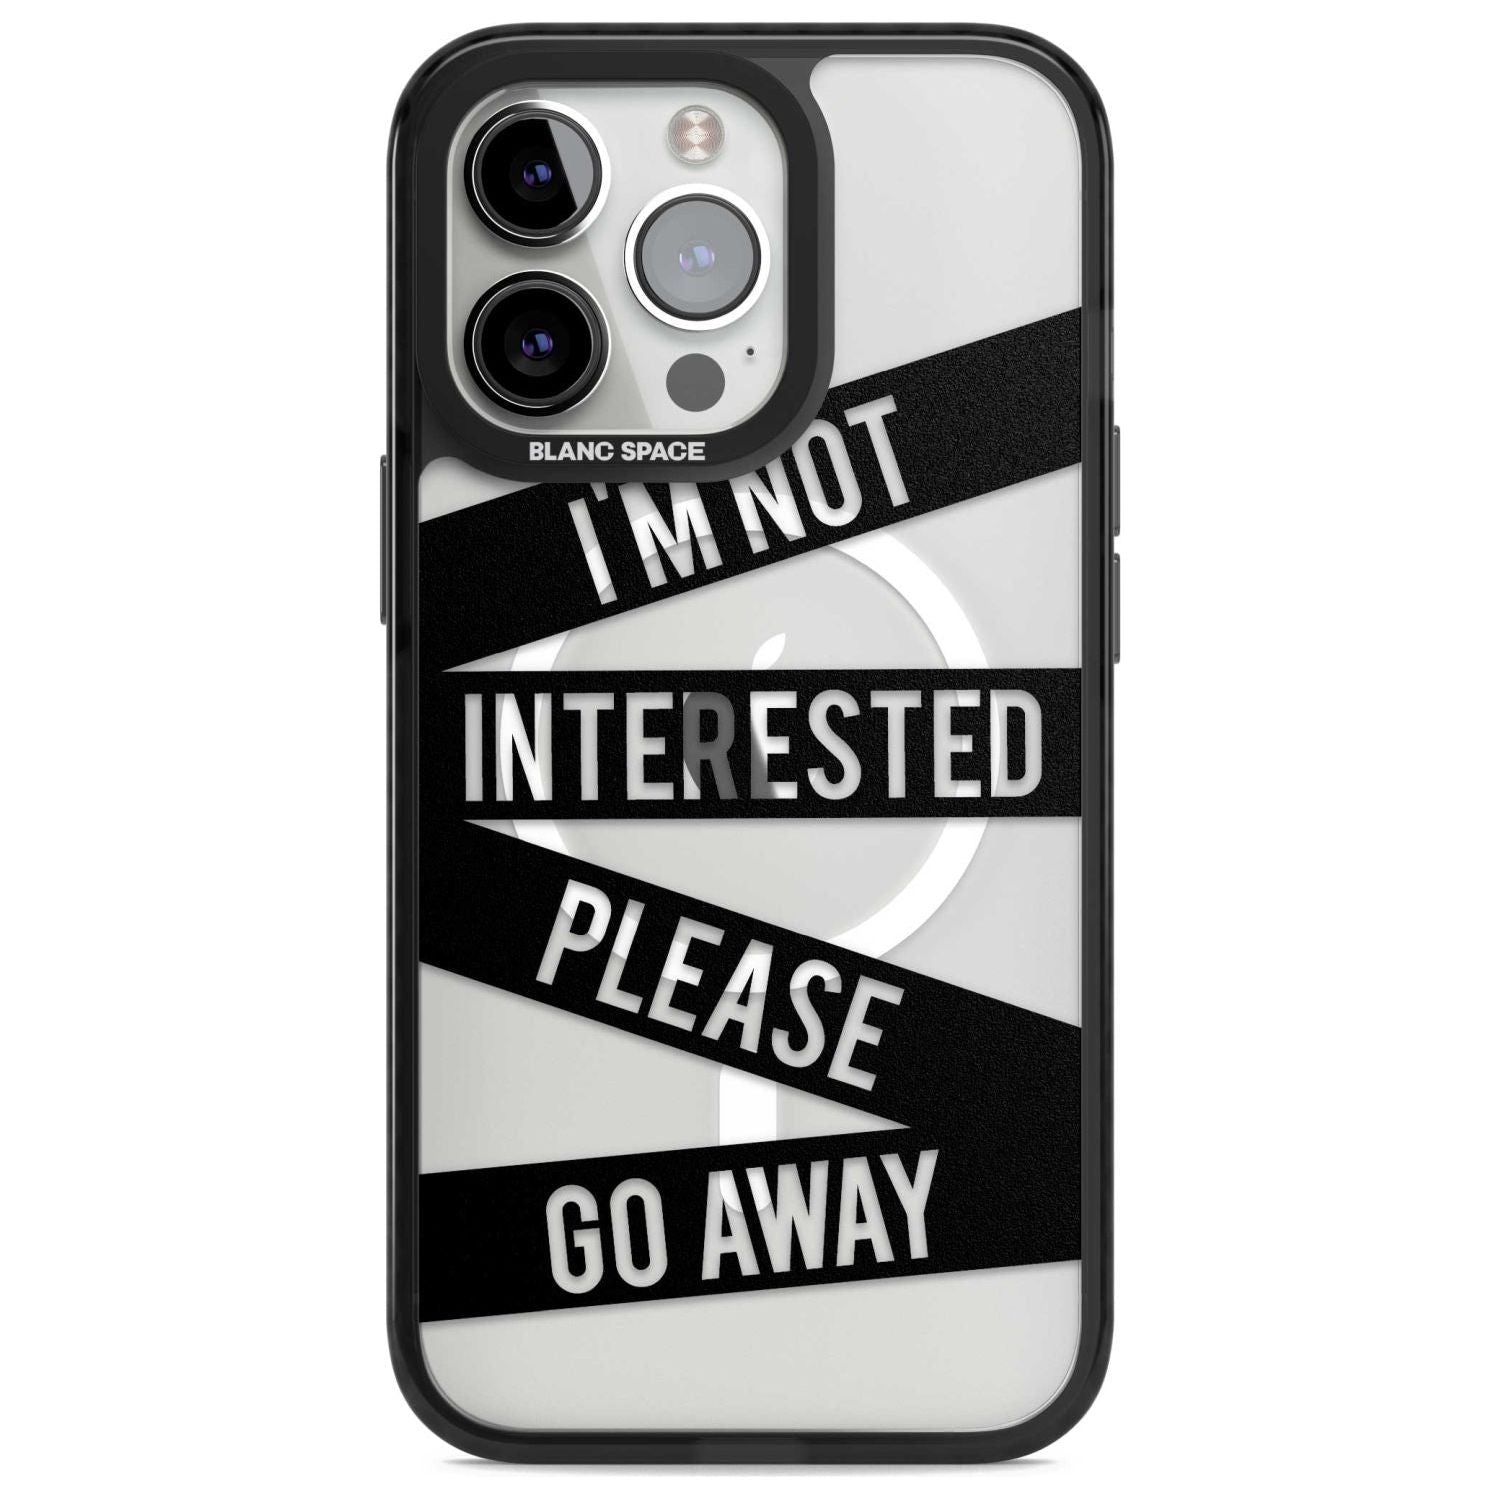 Black Stripes I'm Not Interested Phone Case iPhone 15 Pro Max / Magsafe Black Impact Case,iPhone 15 Pro / Magsafe Black Impact Case,iPhone 14 Pro Max / Magsafe Black Impact Case,iPhone 14 Pro / Magsafe Black Impact Case,iPhone 13 Pro / Magsafe Black Impact Case Blanc Space